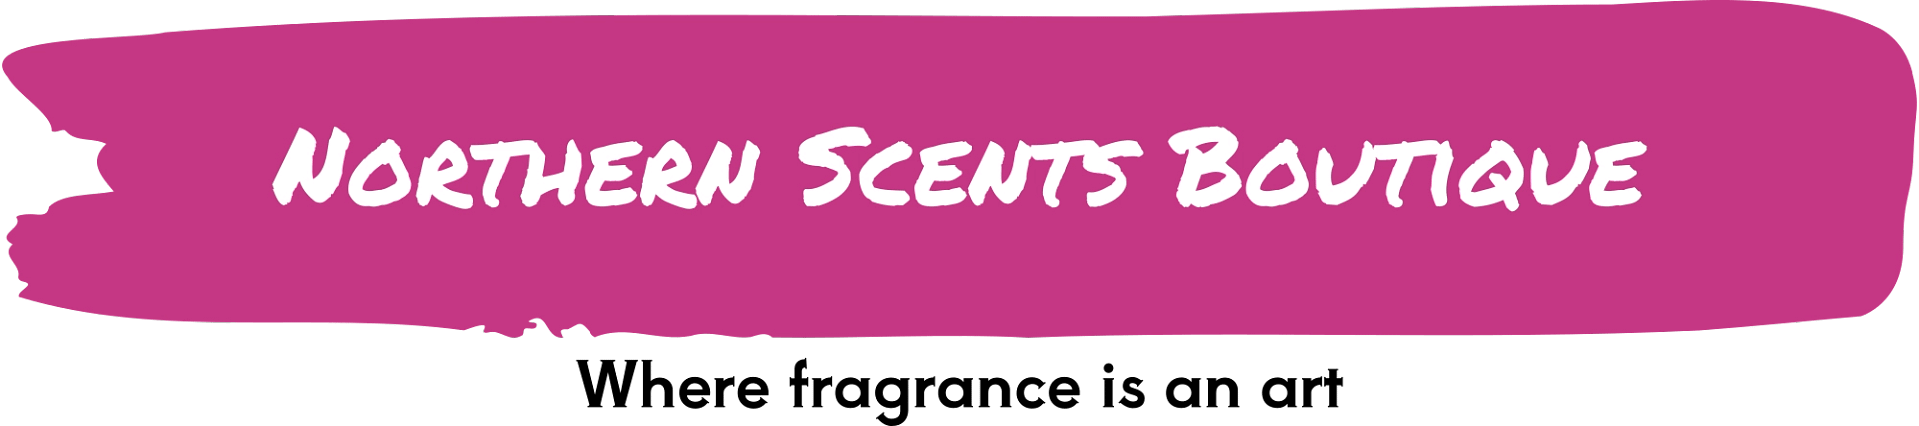 Northern Scents Boutique Logo